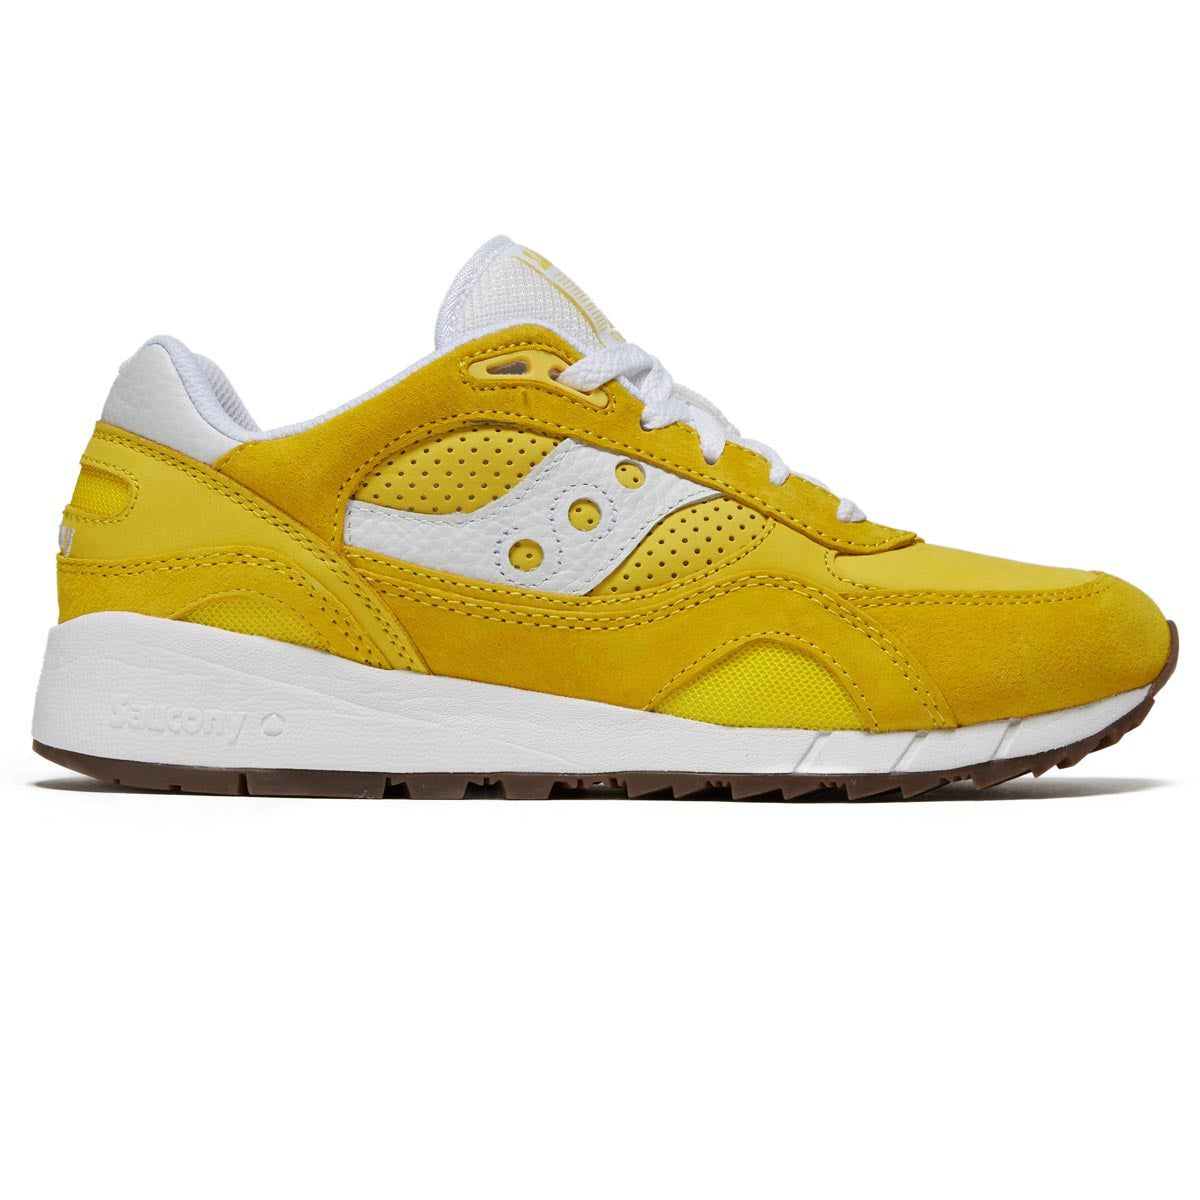 Saucony Shadow 6000 Shoes - Yellow/White image 1